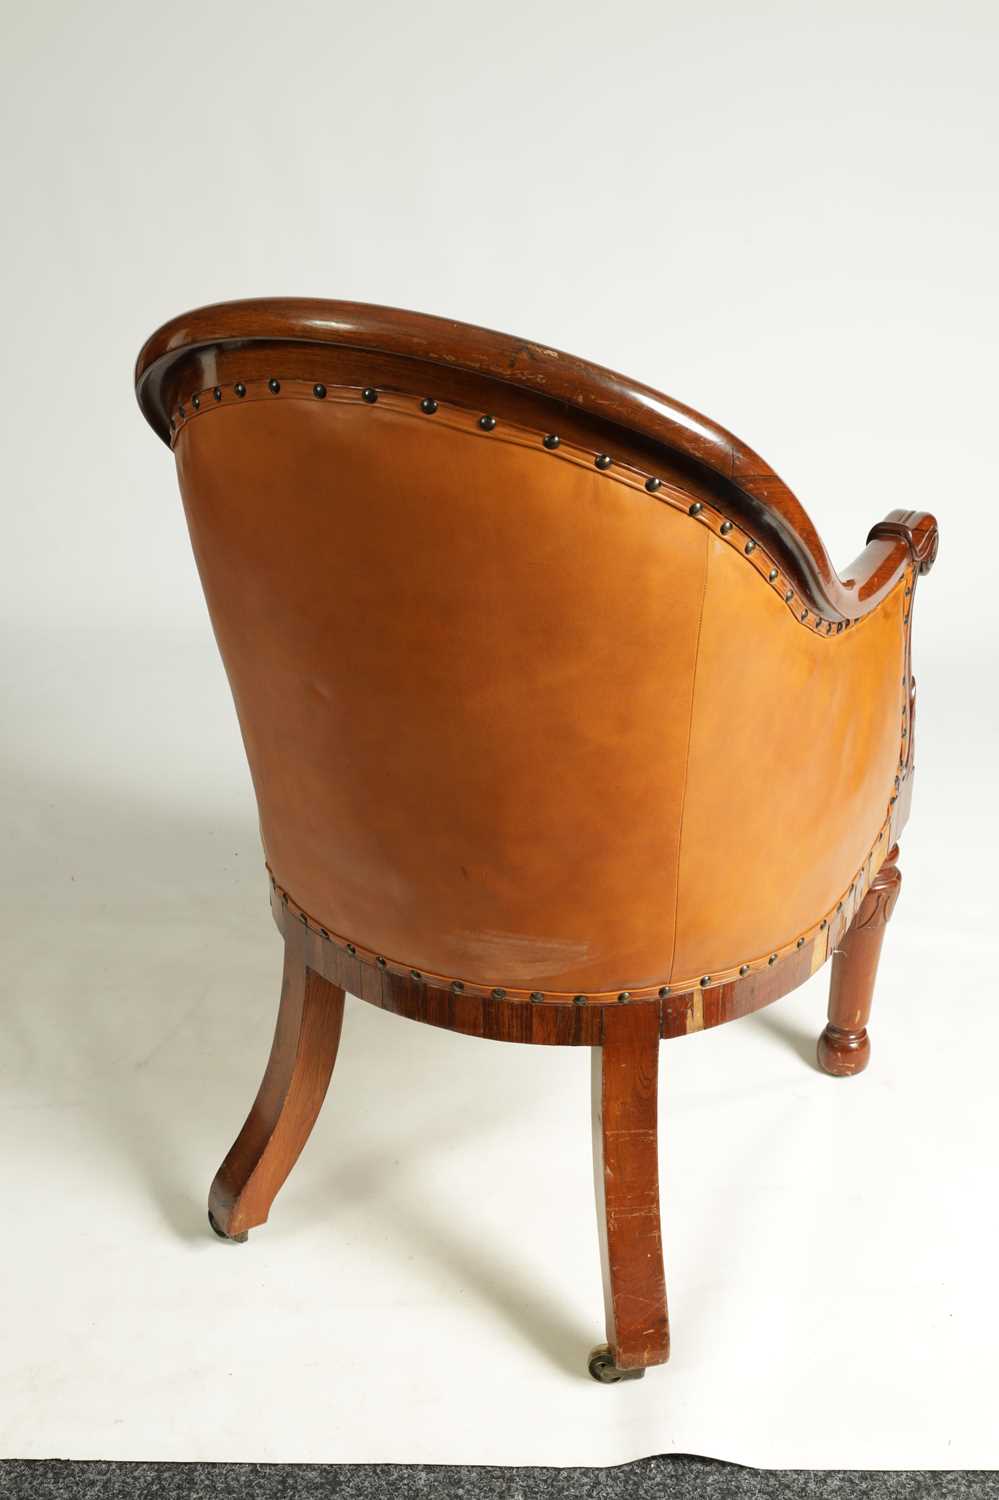 A PAIR OF REGENCY FIGURED ROSEWOOD AND TAN LEATHER BUTTON UPHOLSTERED LIBRARY CHAIRS - Image 5 of 13